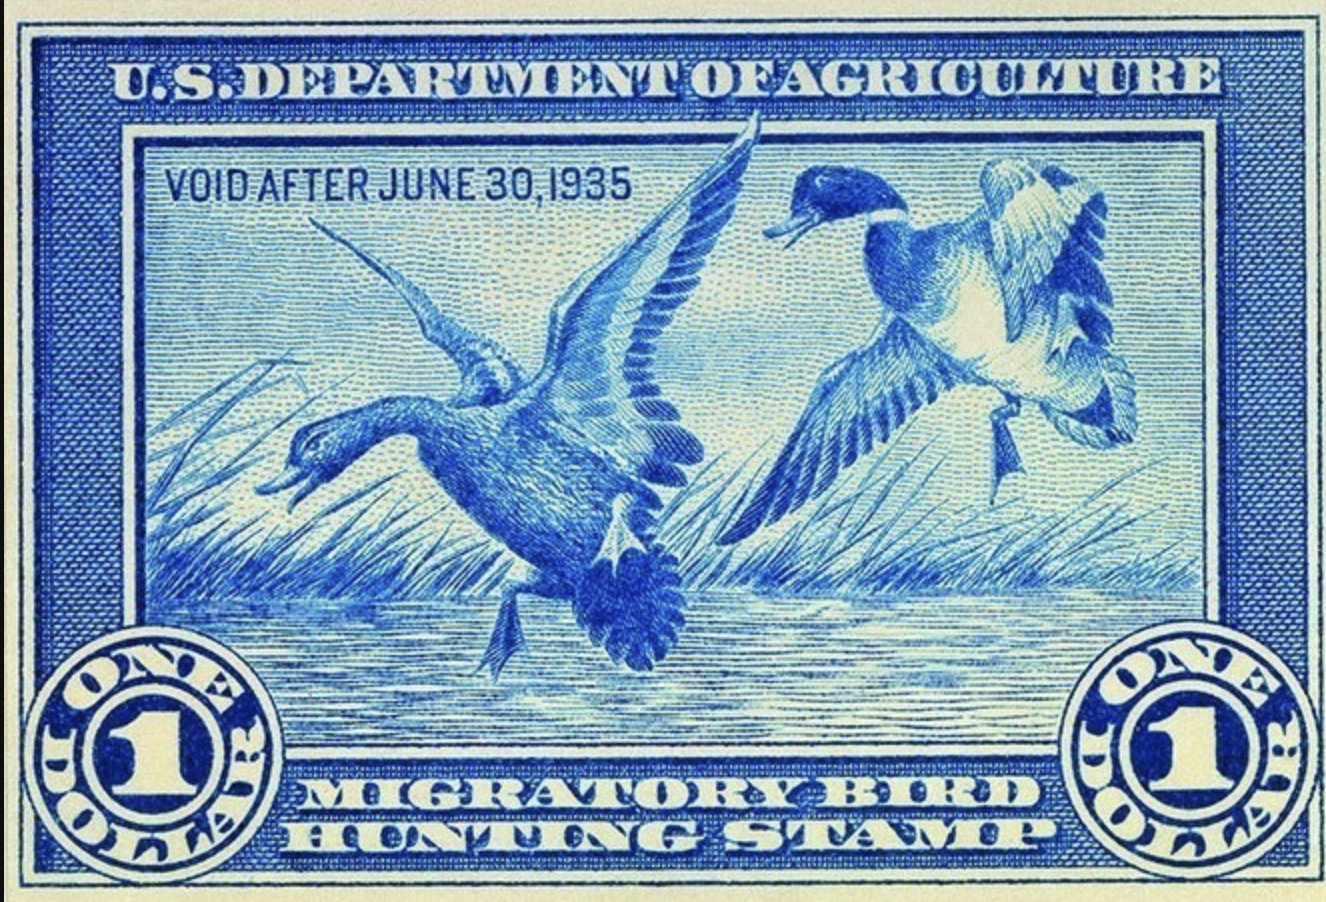 The American Waterfowlers’ Stamp on Wetland Conservation